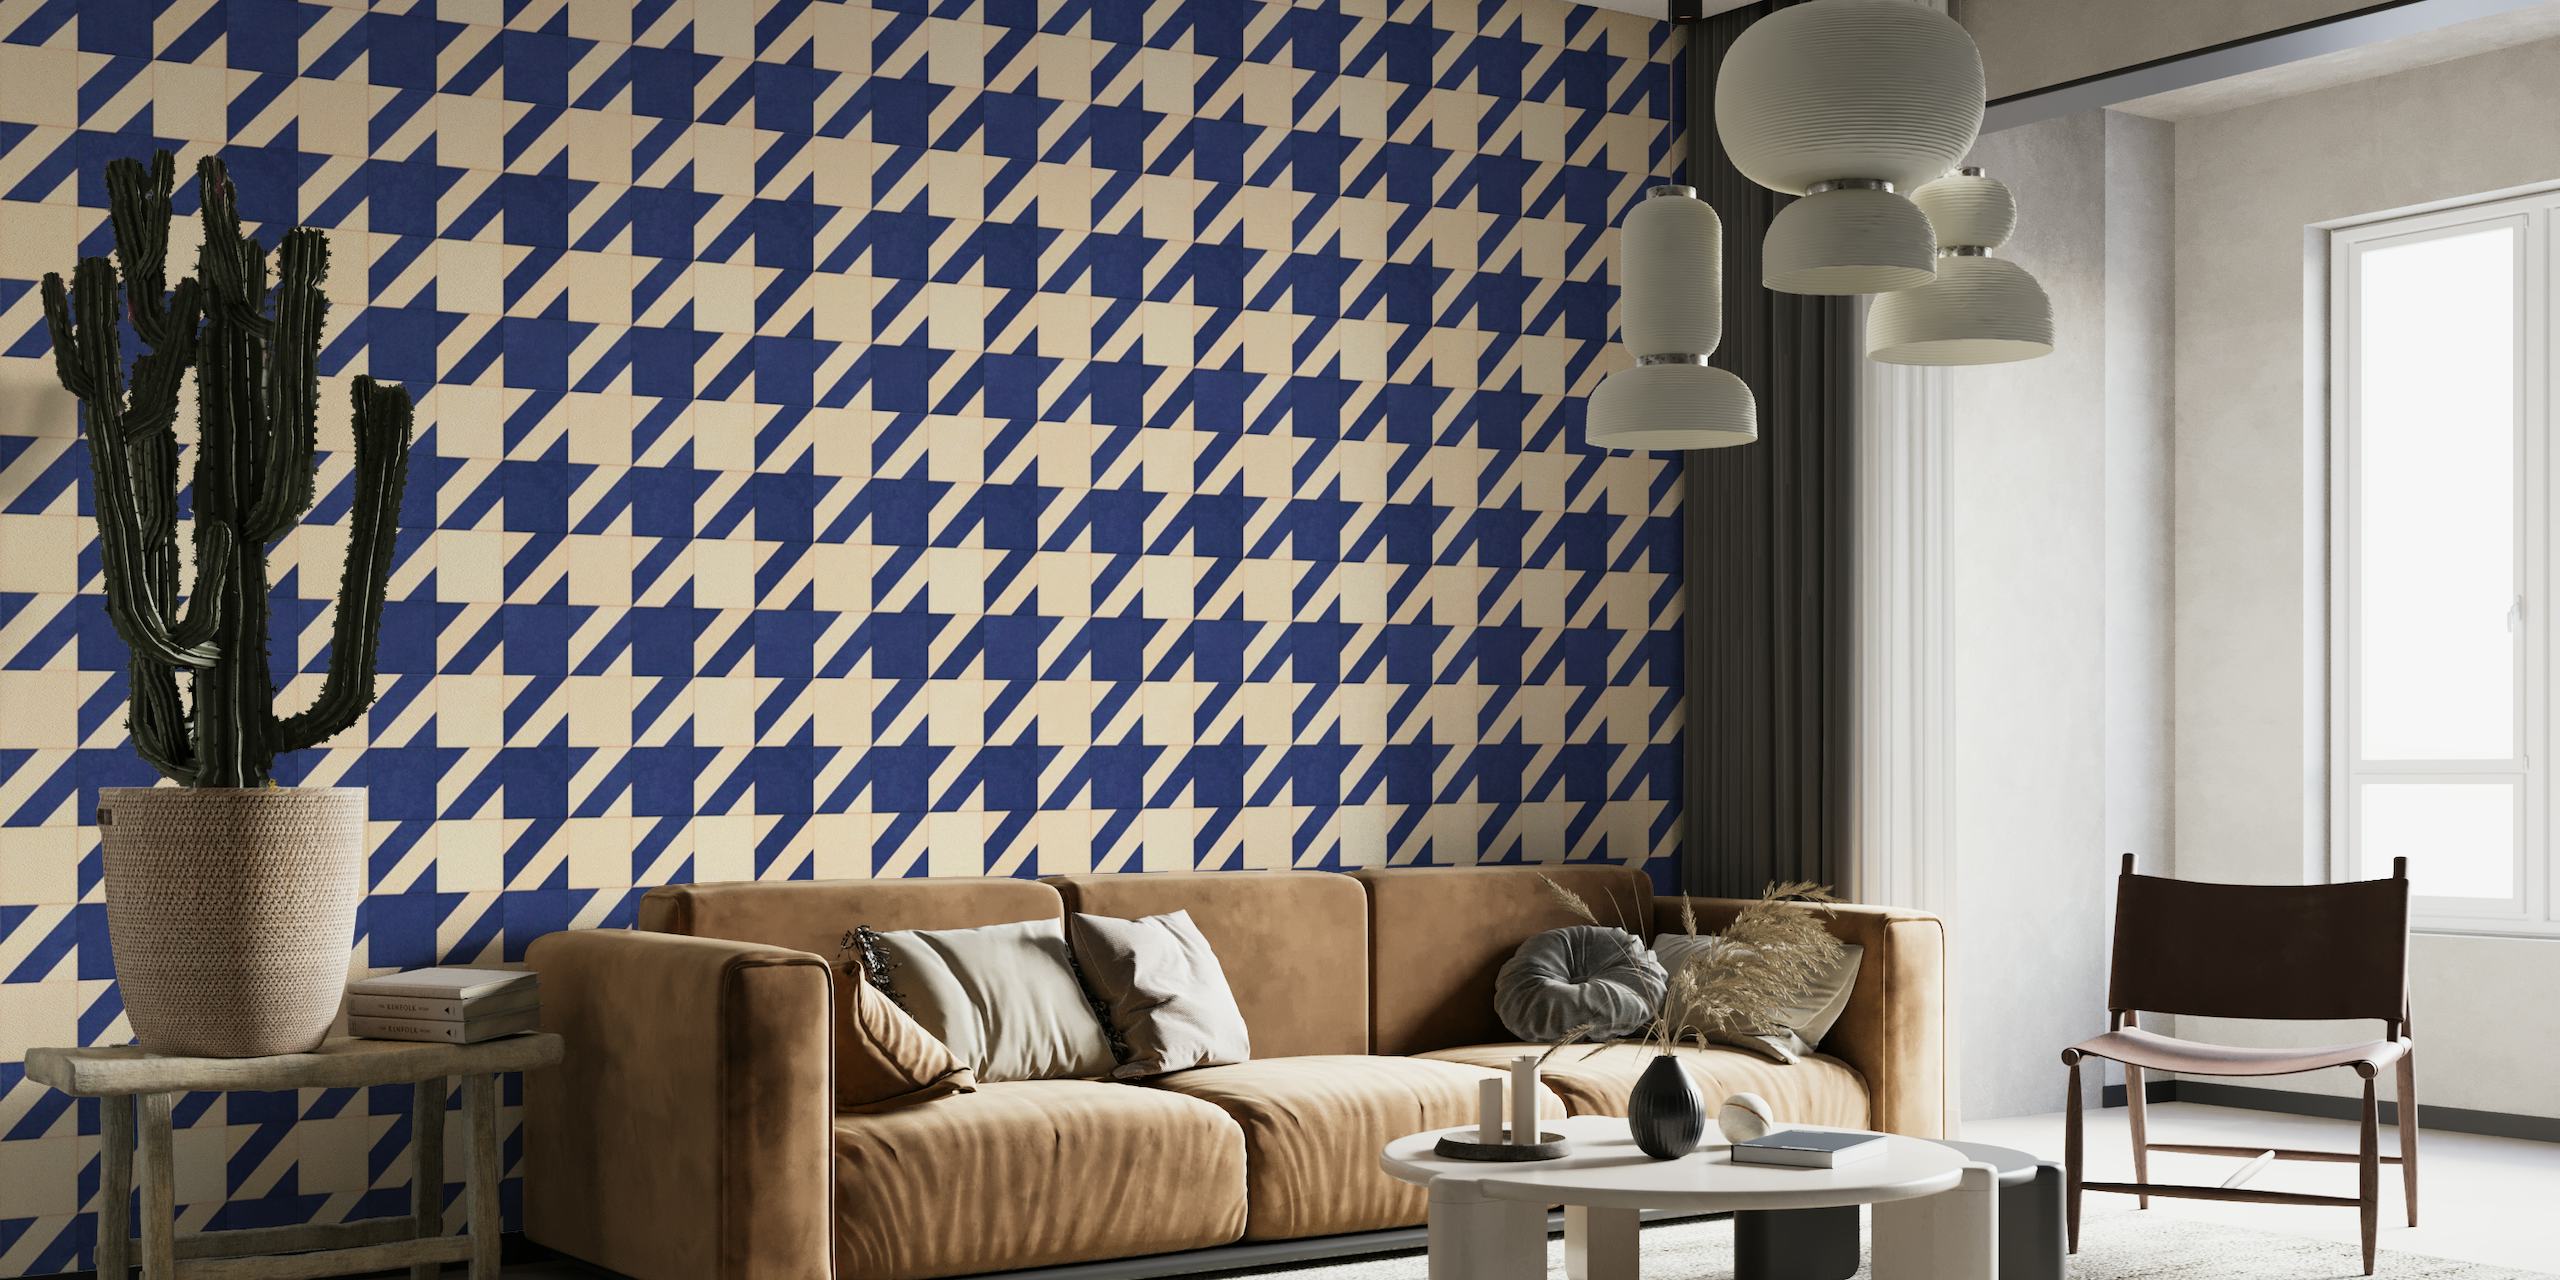 TILES 011 A - Houndstooth tapety